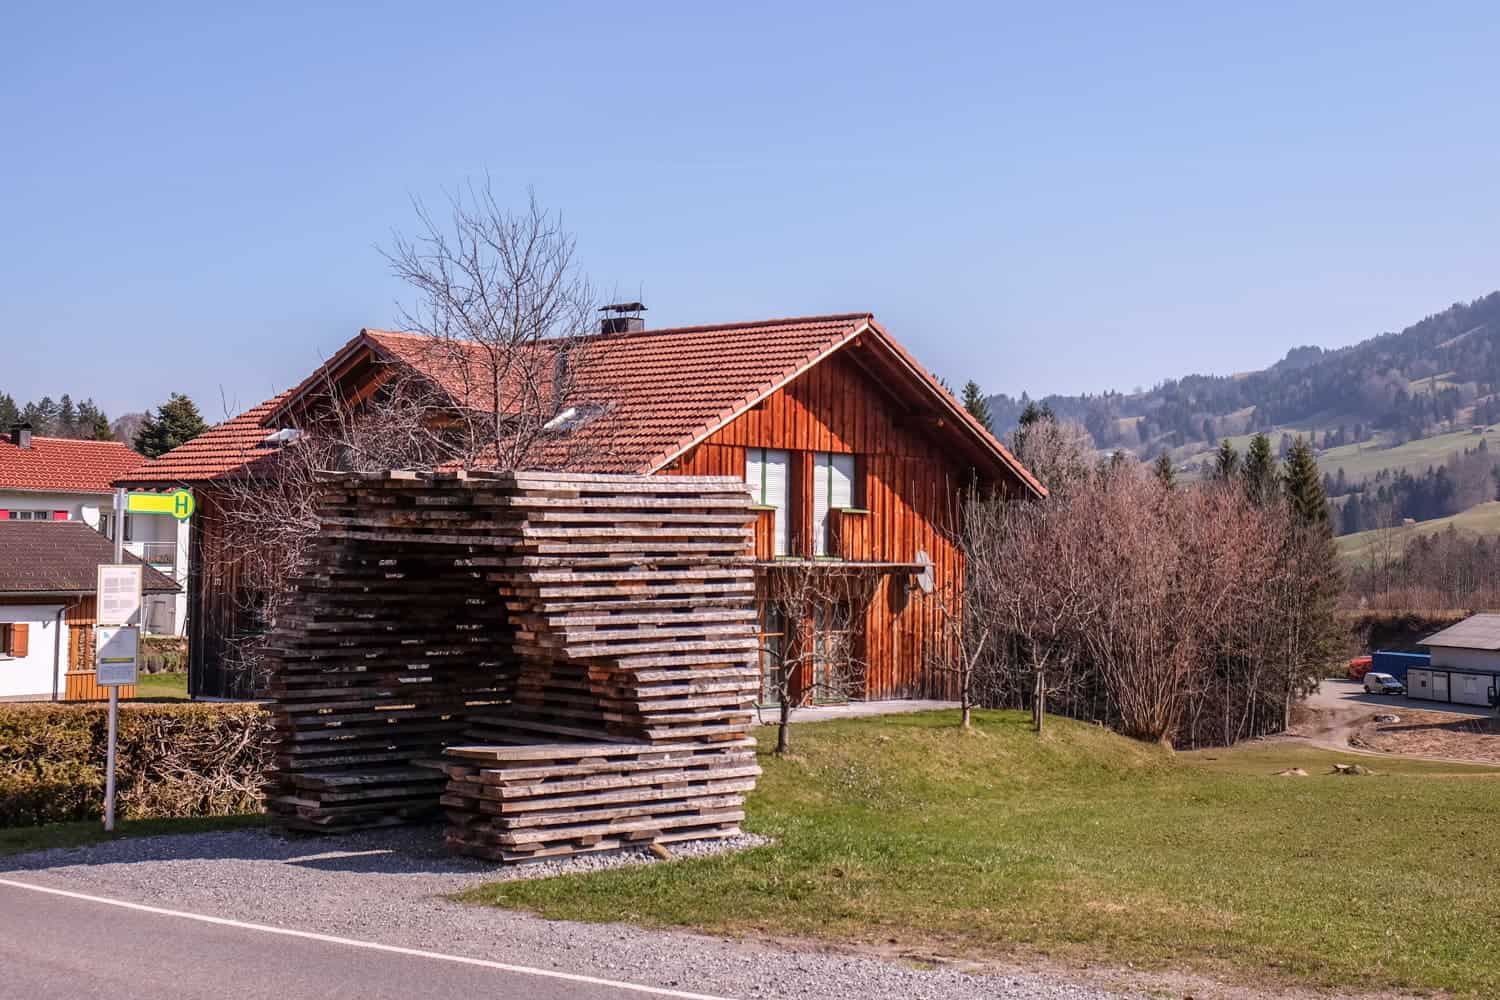 Stacked wood is one of the special design bus stops in Krumbach, Vorarlberg, Austria